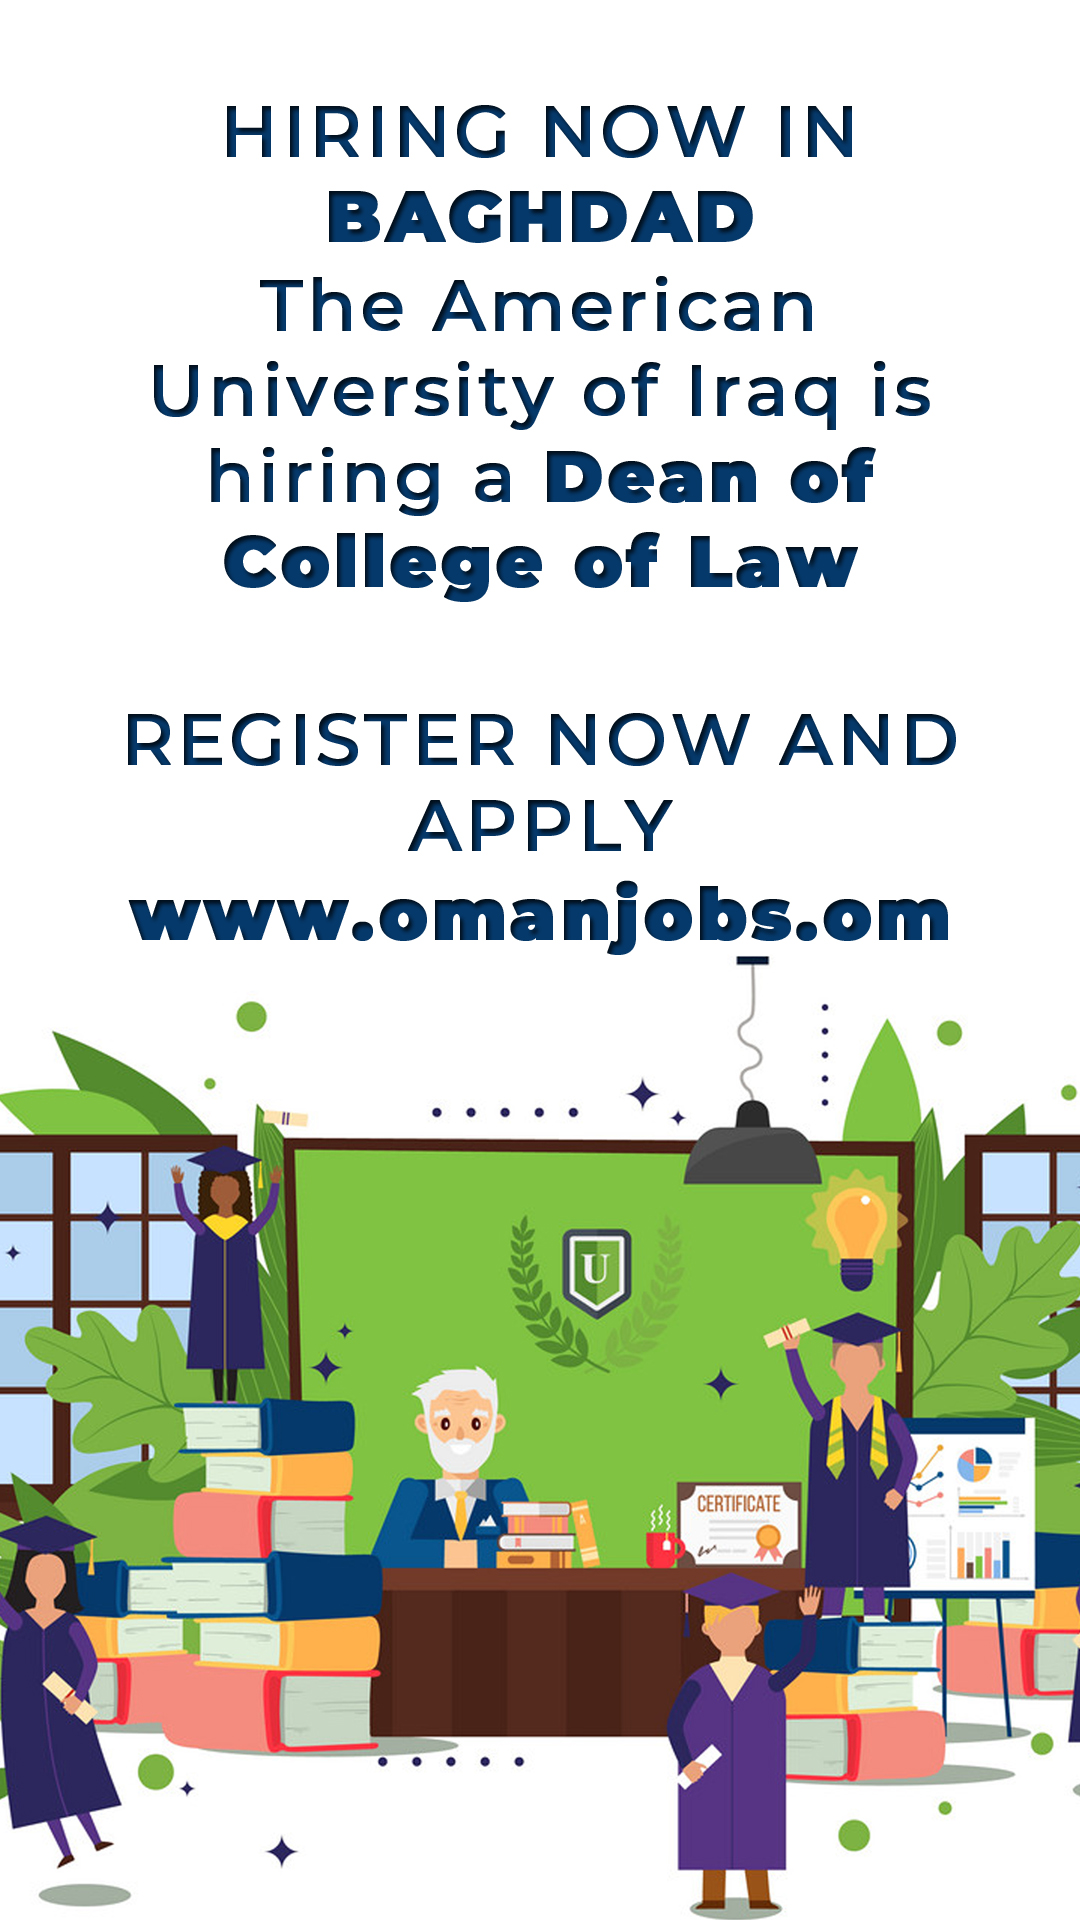 Hiring Dean of College of Law